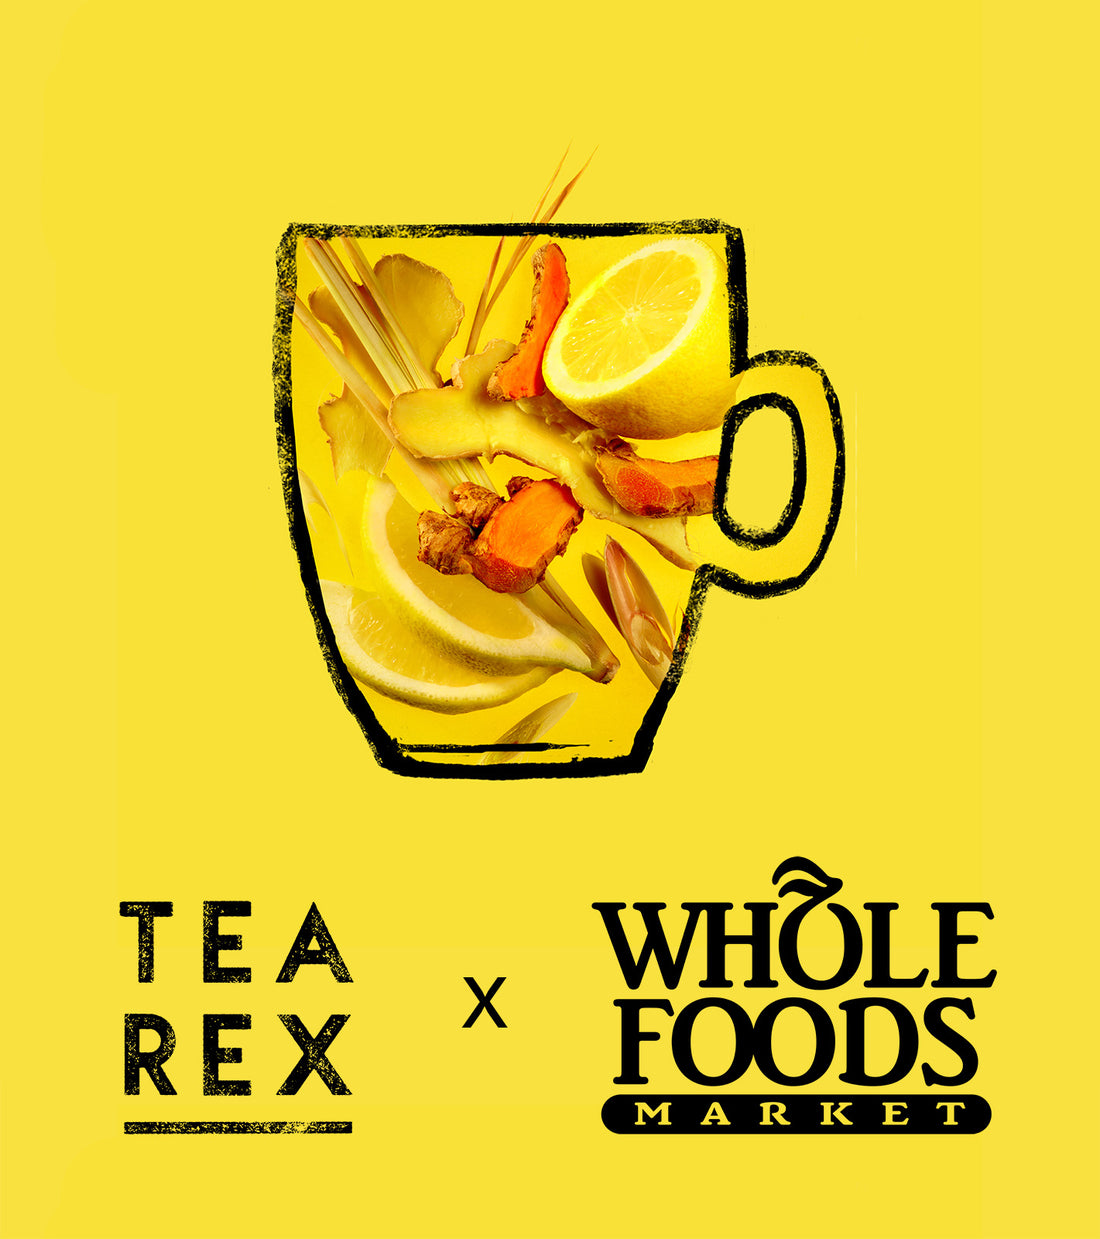 TEA REX has landed at Whole Foods